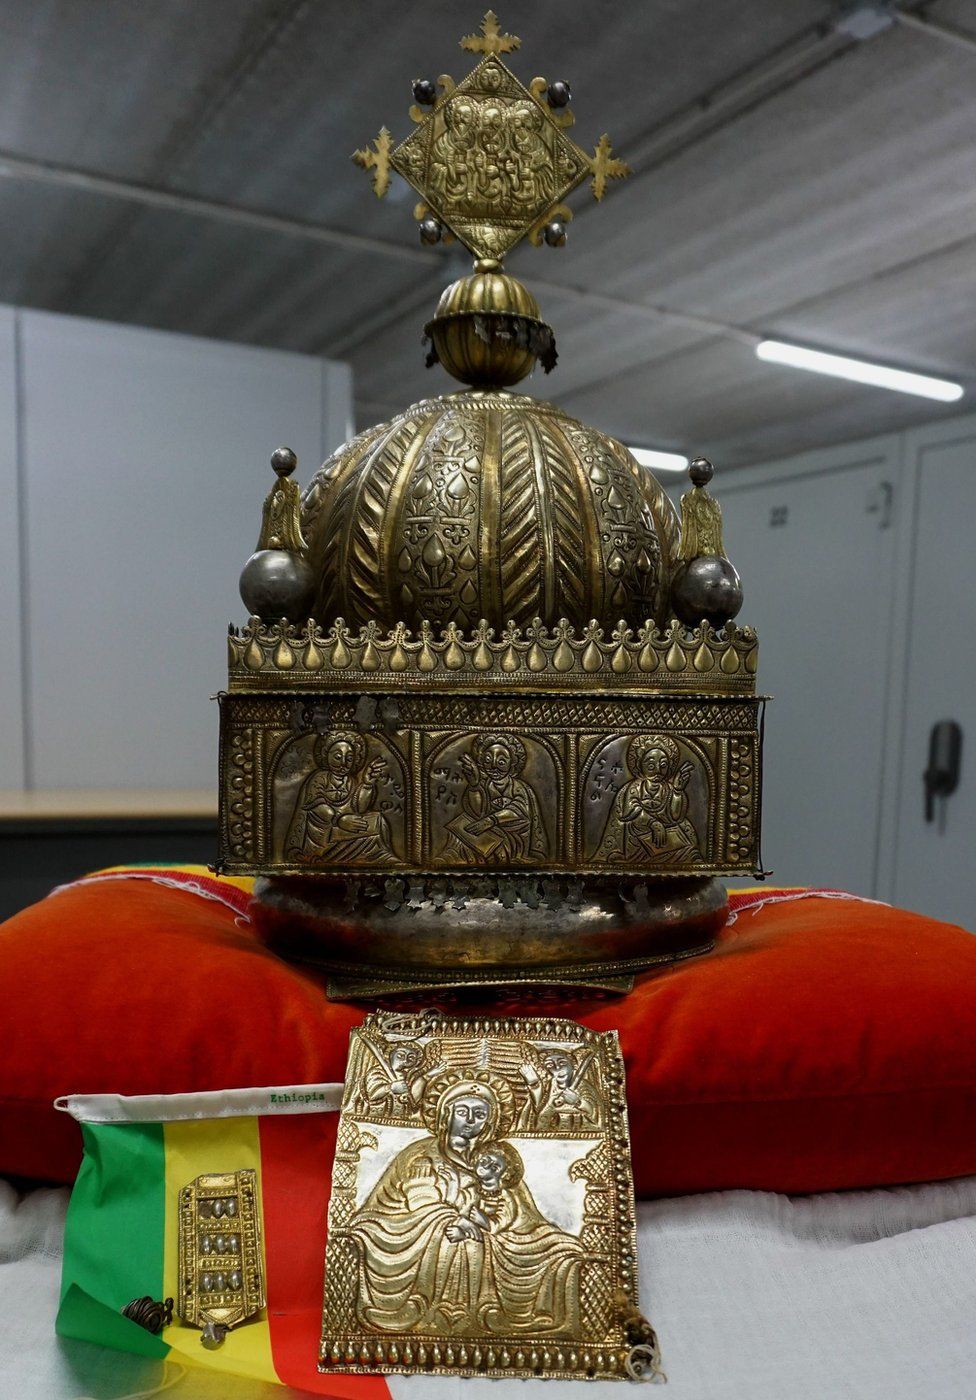 The crown in its secure storage facility, sat on a red pillow with an Ethiopian flag beside it